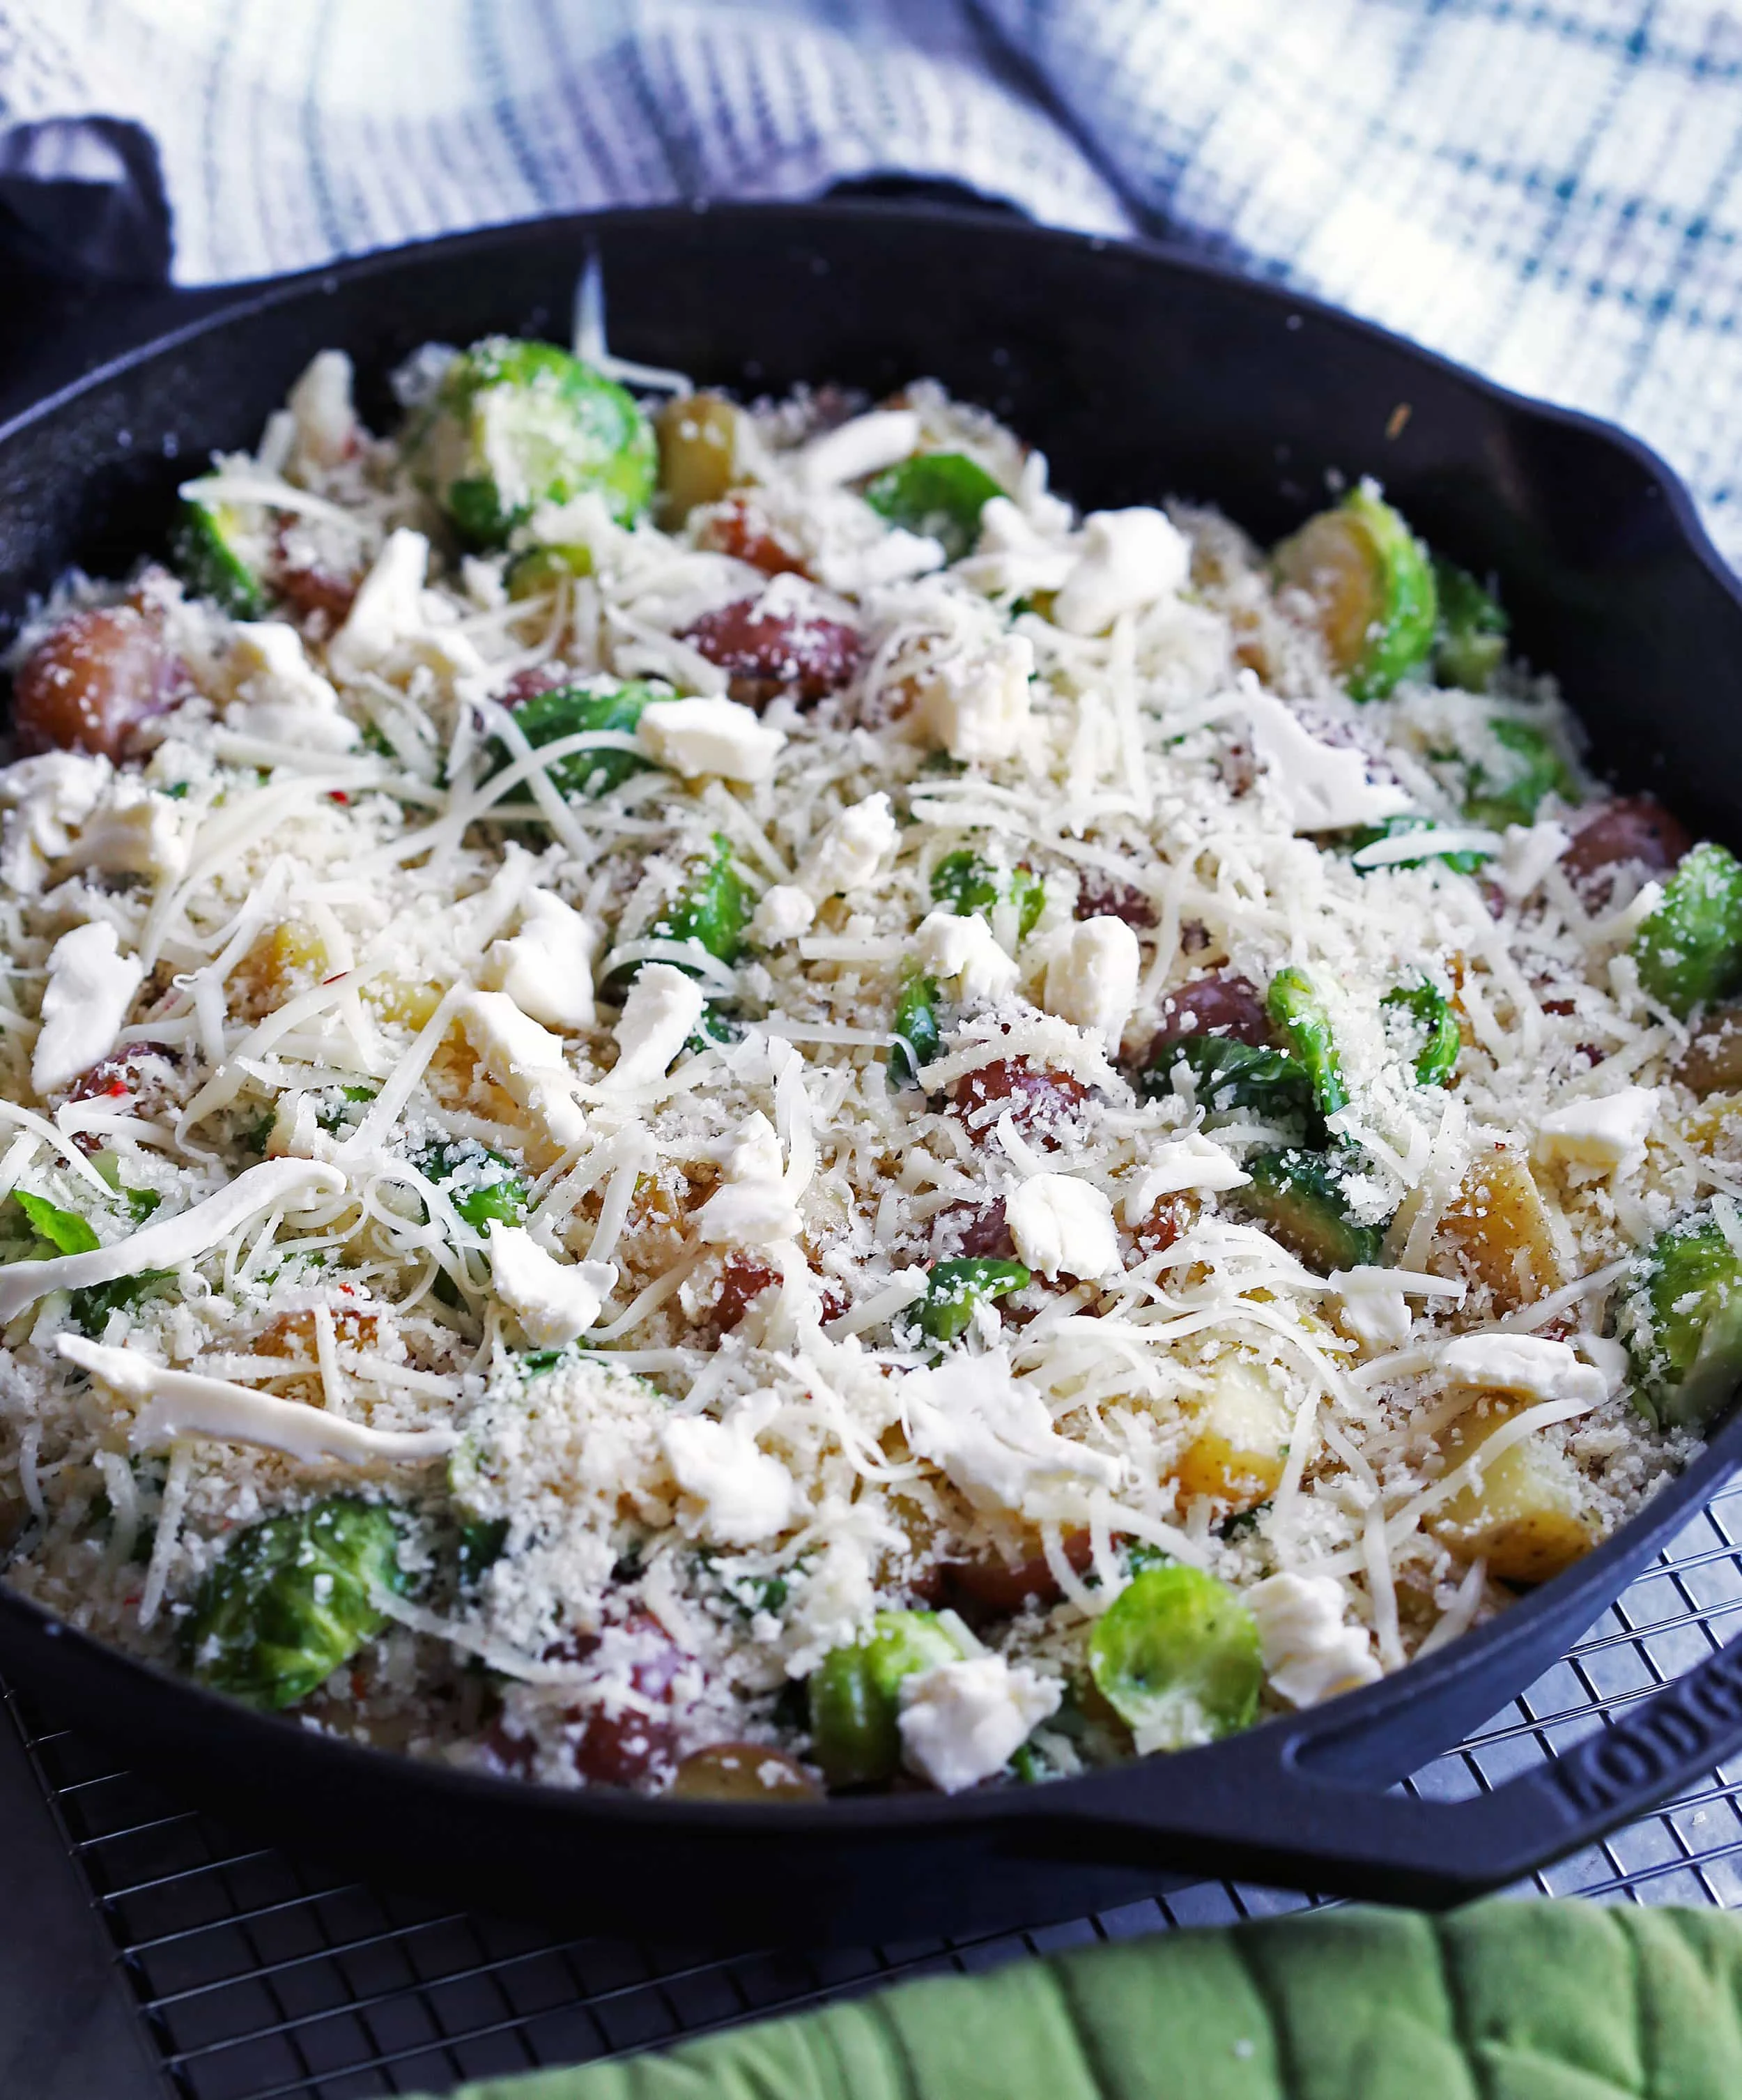 Sautéed onions, baby potatoes, and Brussels sprouts topped with cheese and breadcrumbs in a cast iron skillet.